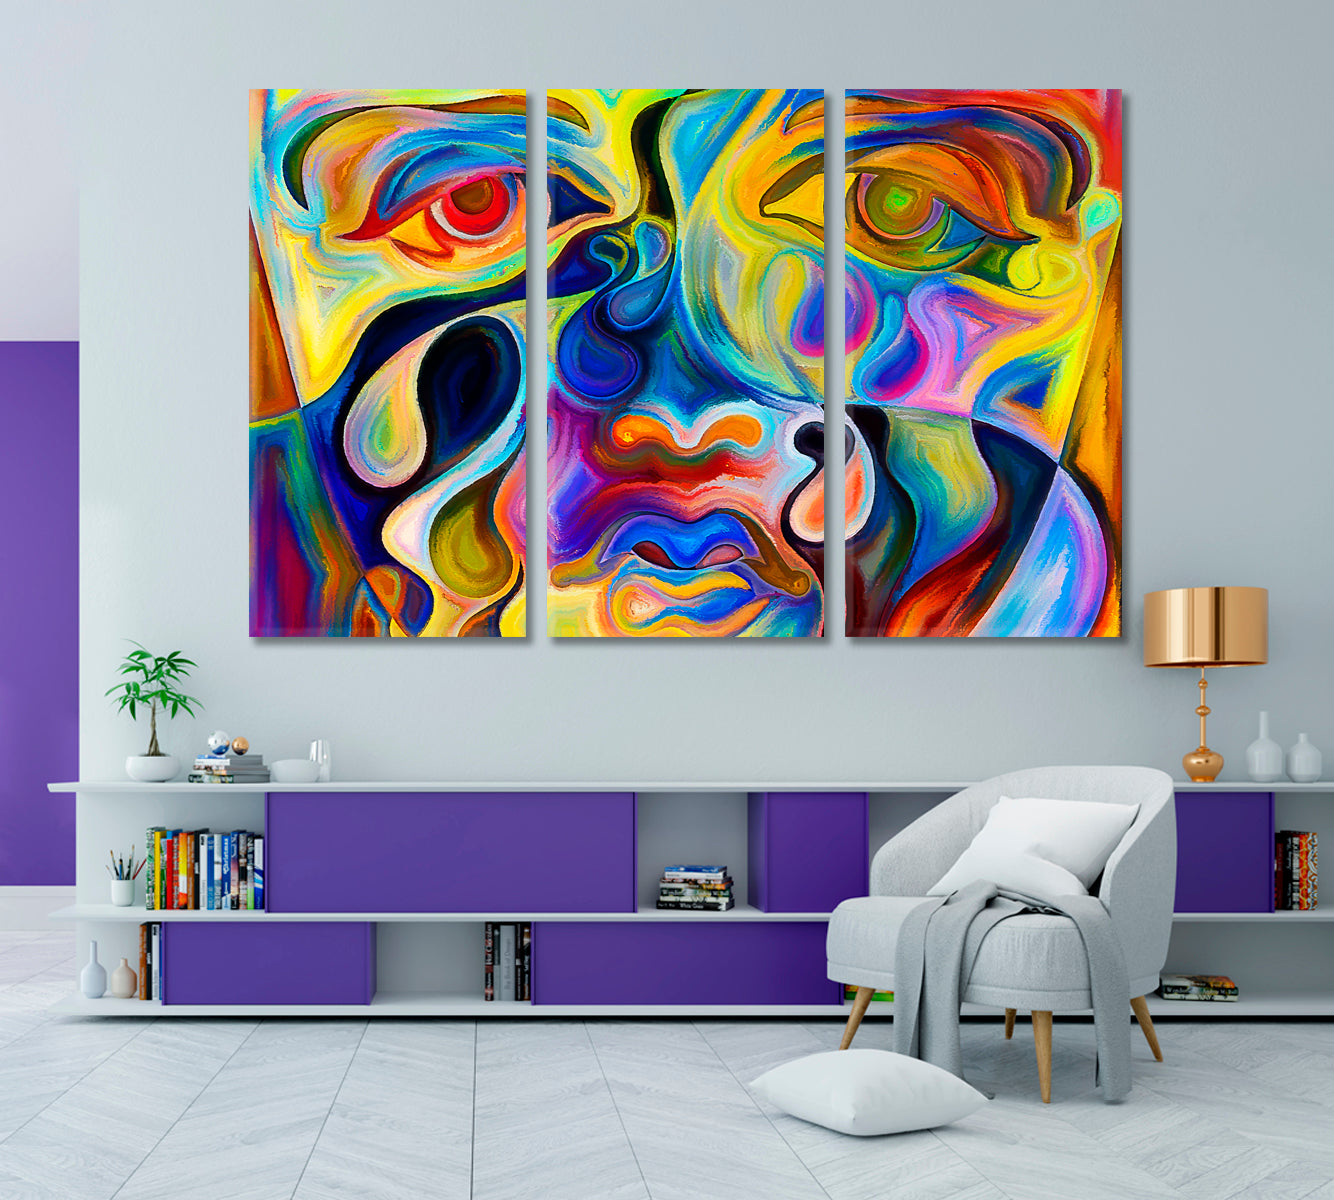 Colors Mood Face and Paint Abstract Design Abstract Art Print Artesty 3 panels 36" x 24" 